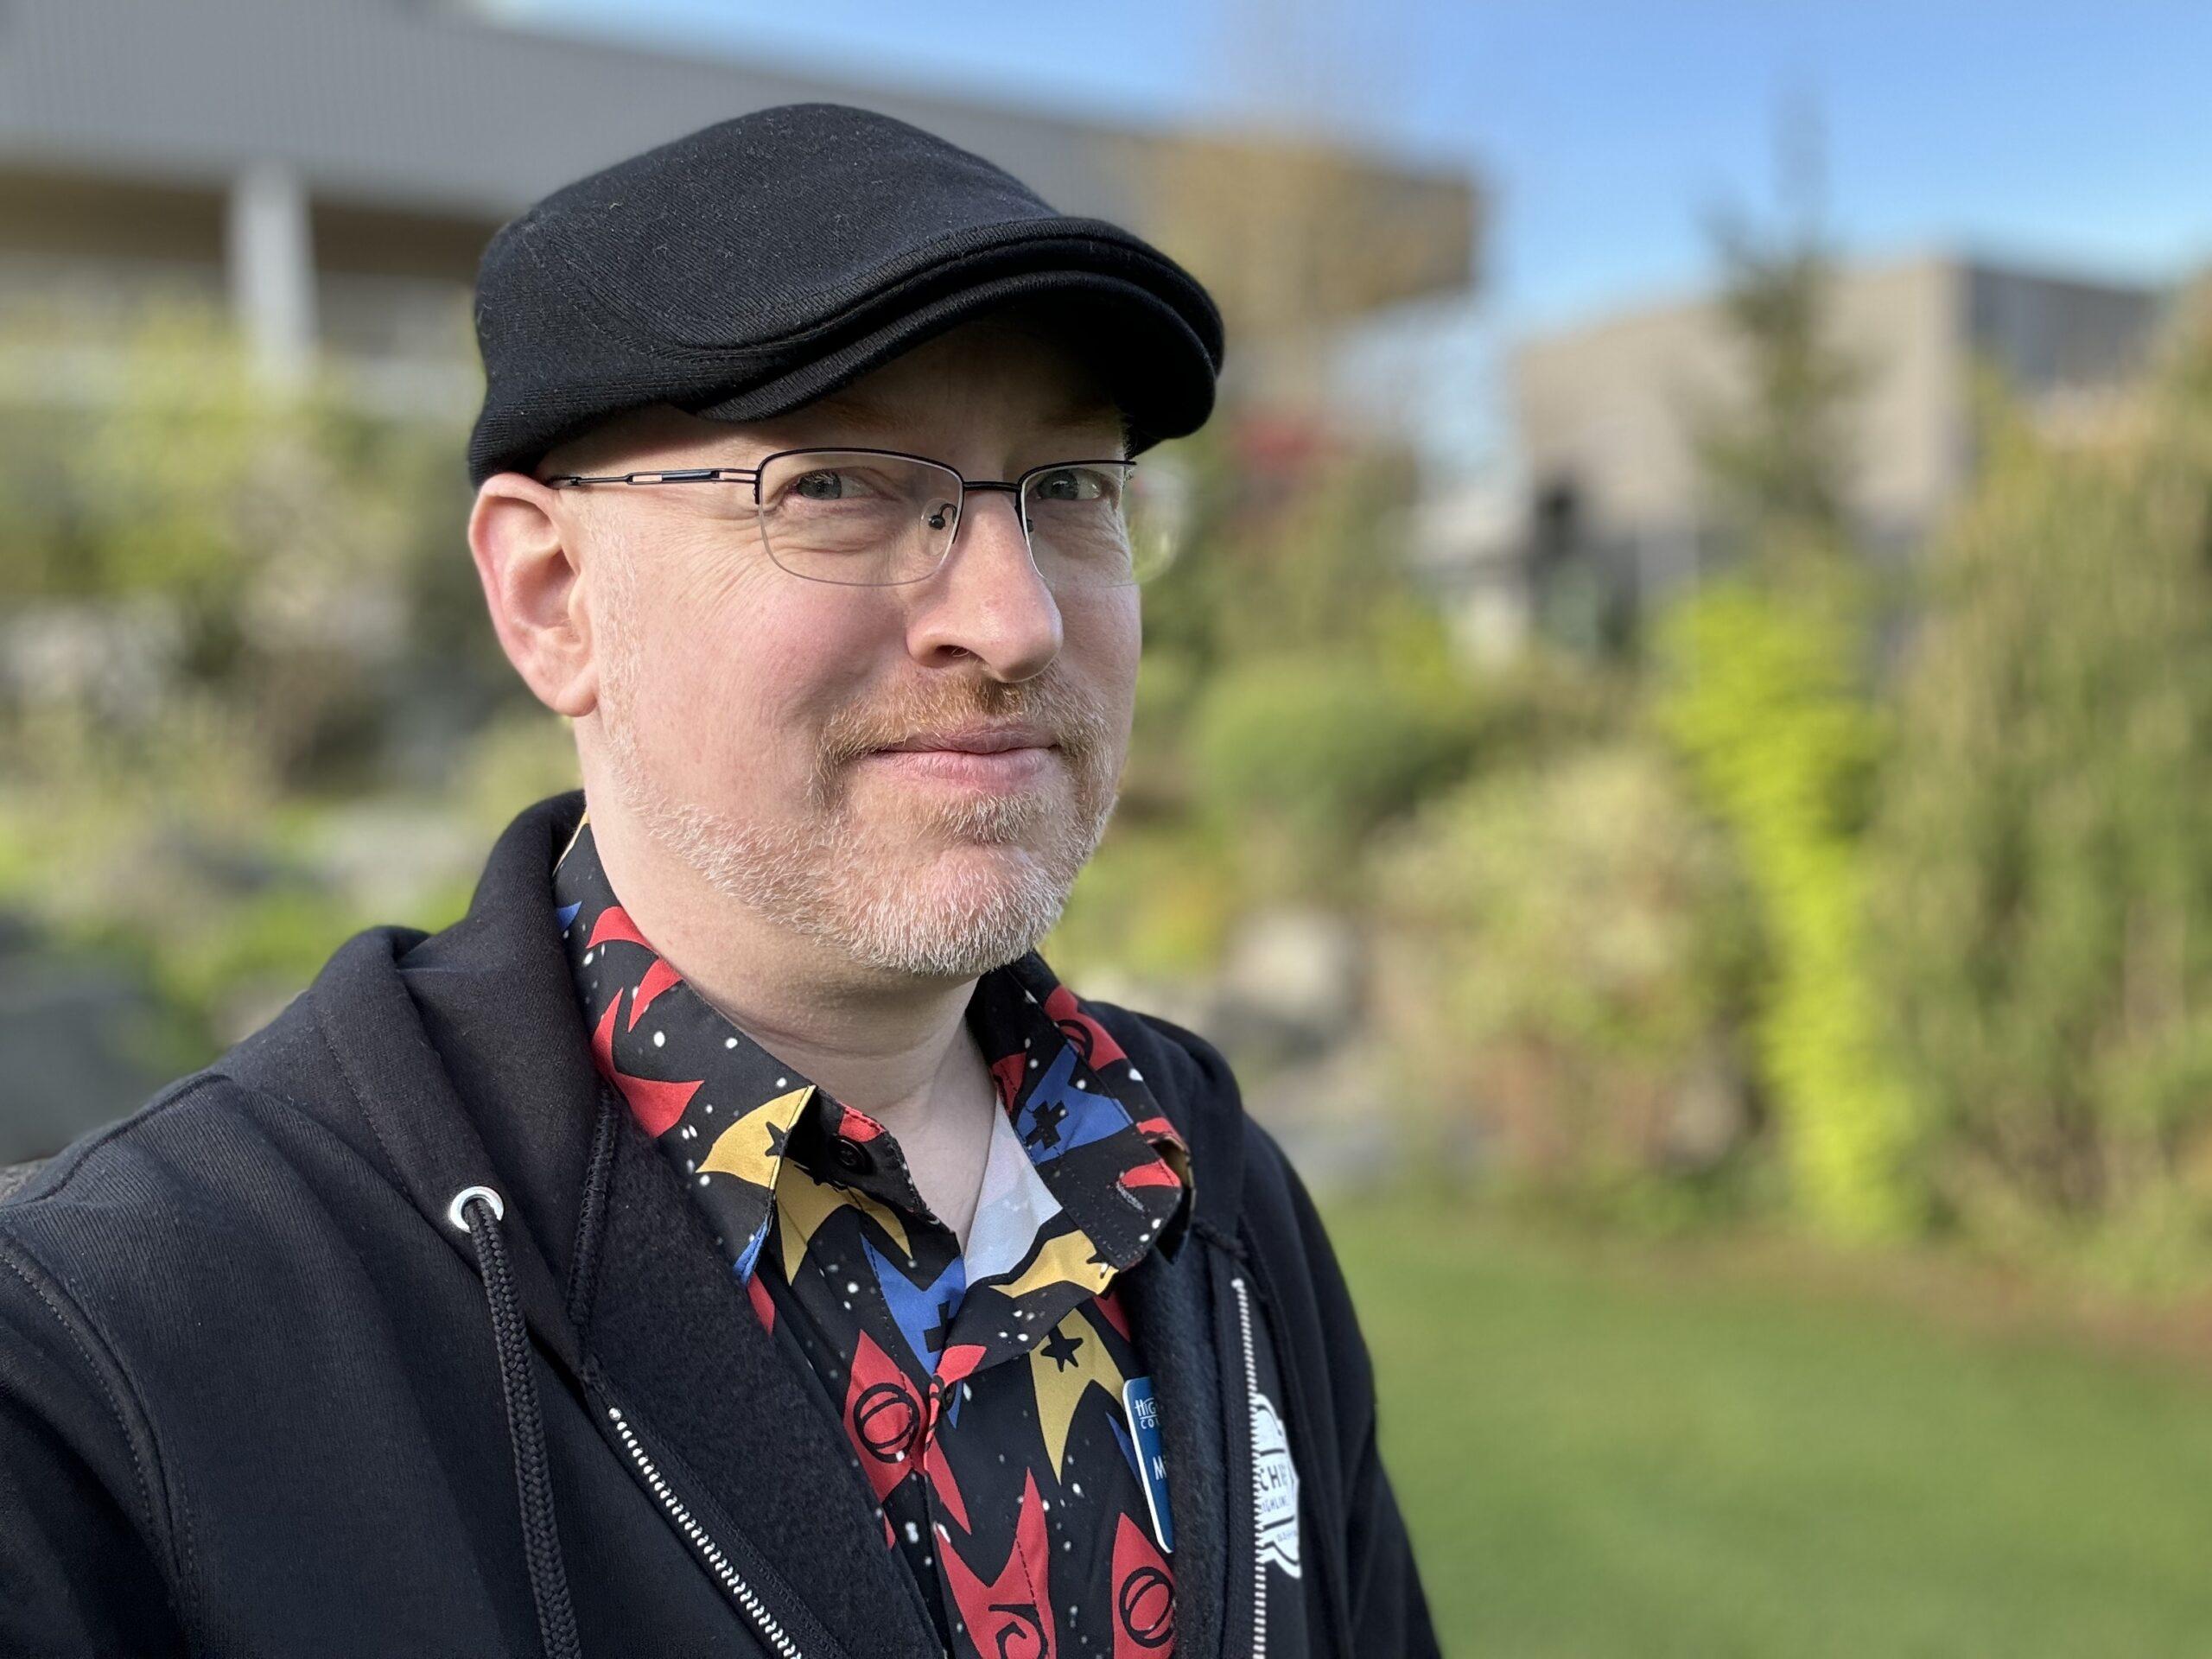 Me outside in front of blurred grass and trees, wearing a black cap, black hoodie, and button-up shirt with a pattern of Star Trek division logos. I'm a white man with glasses and neatly trimmed greying red beard.